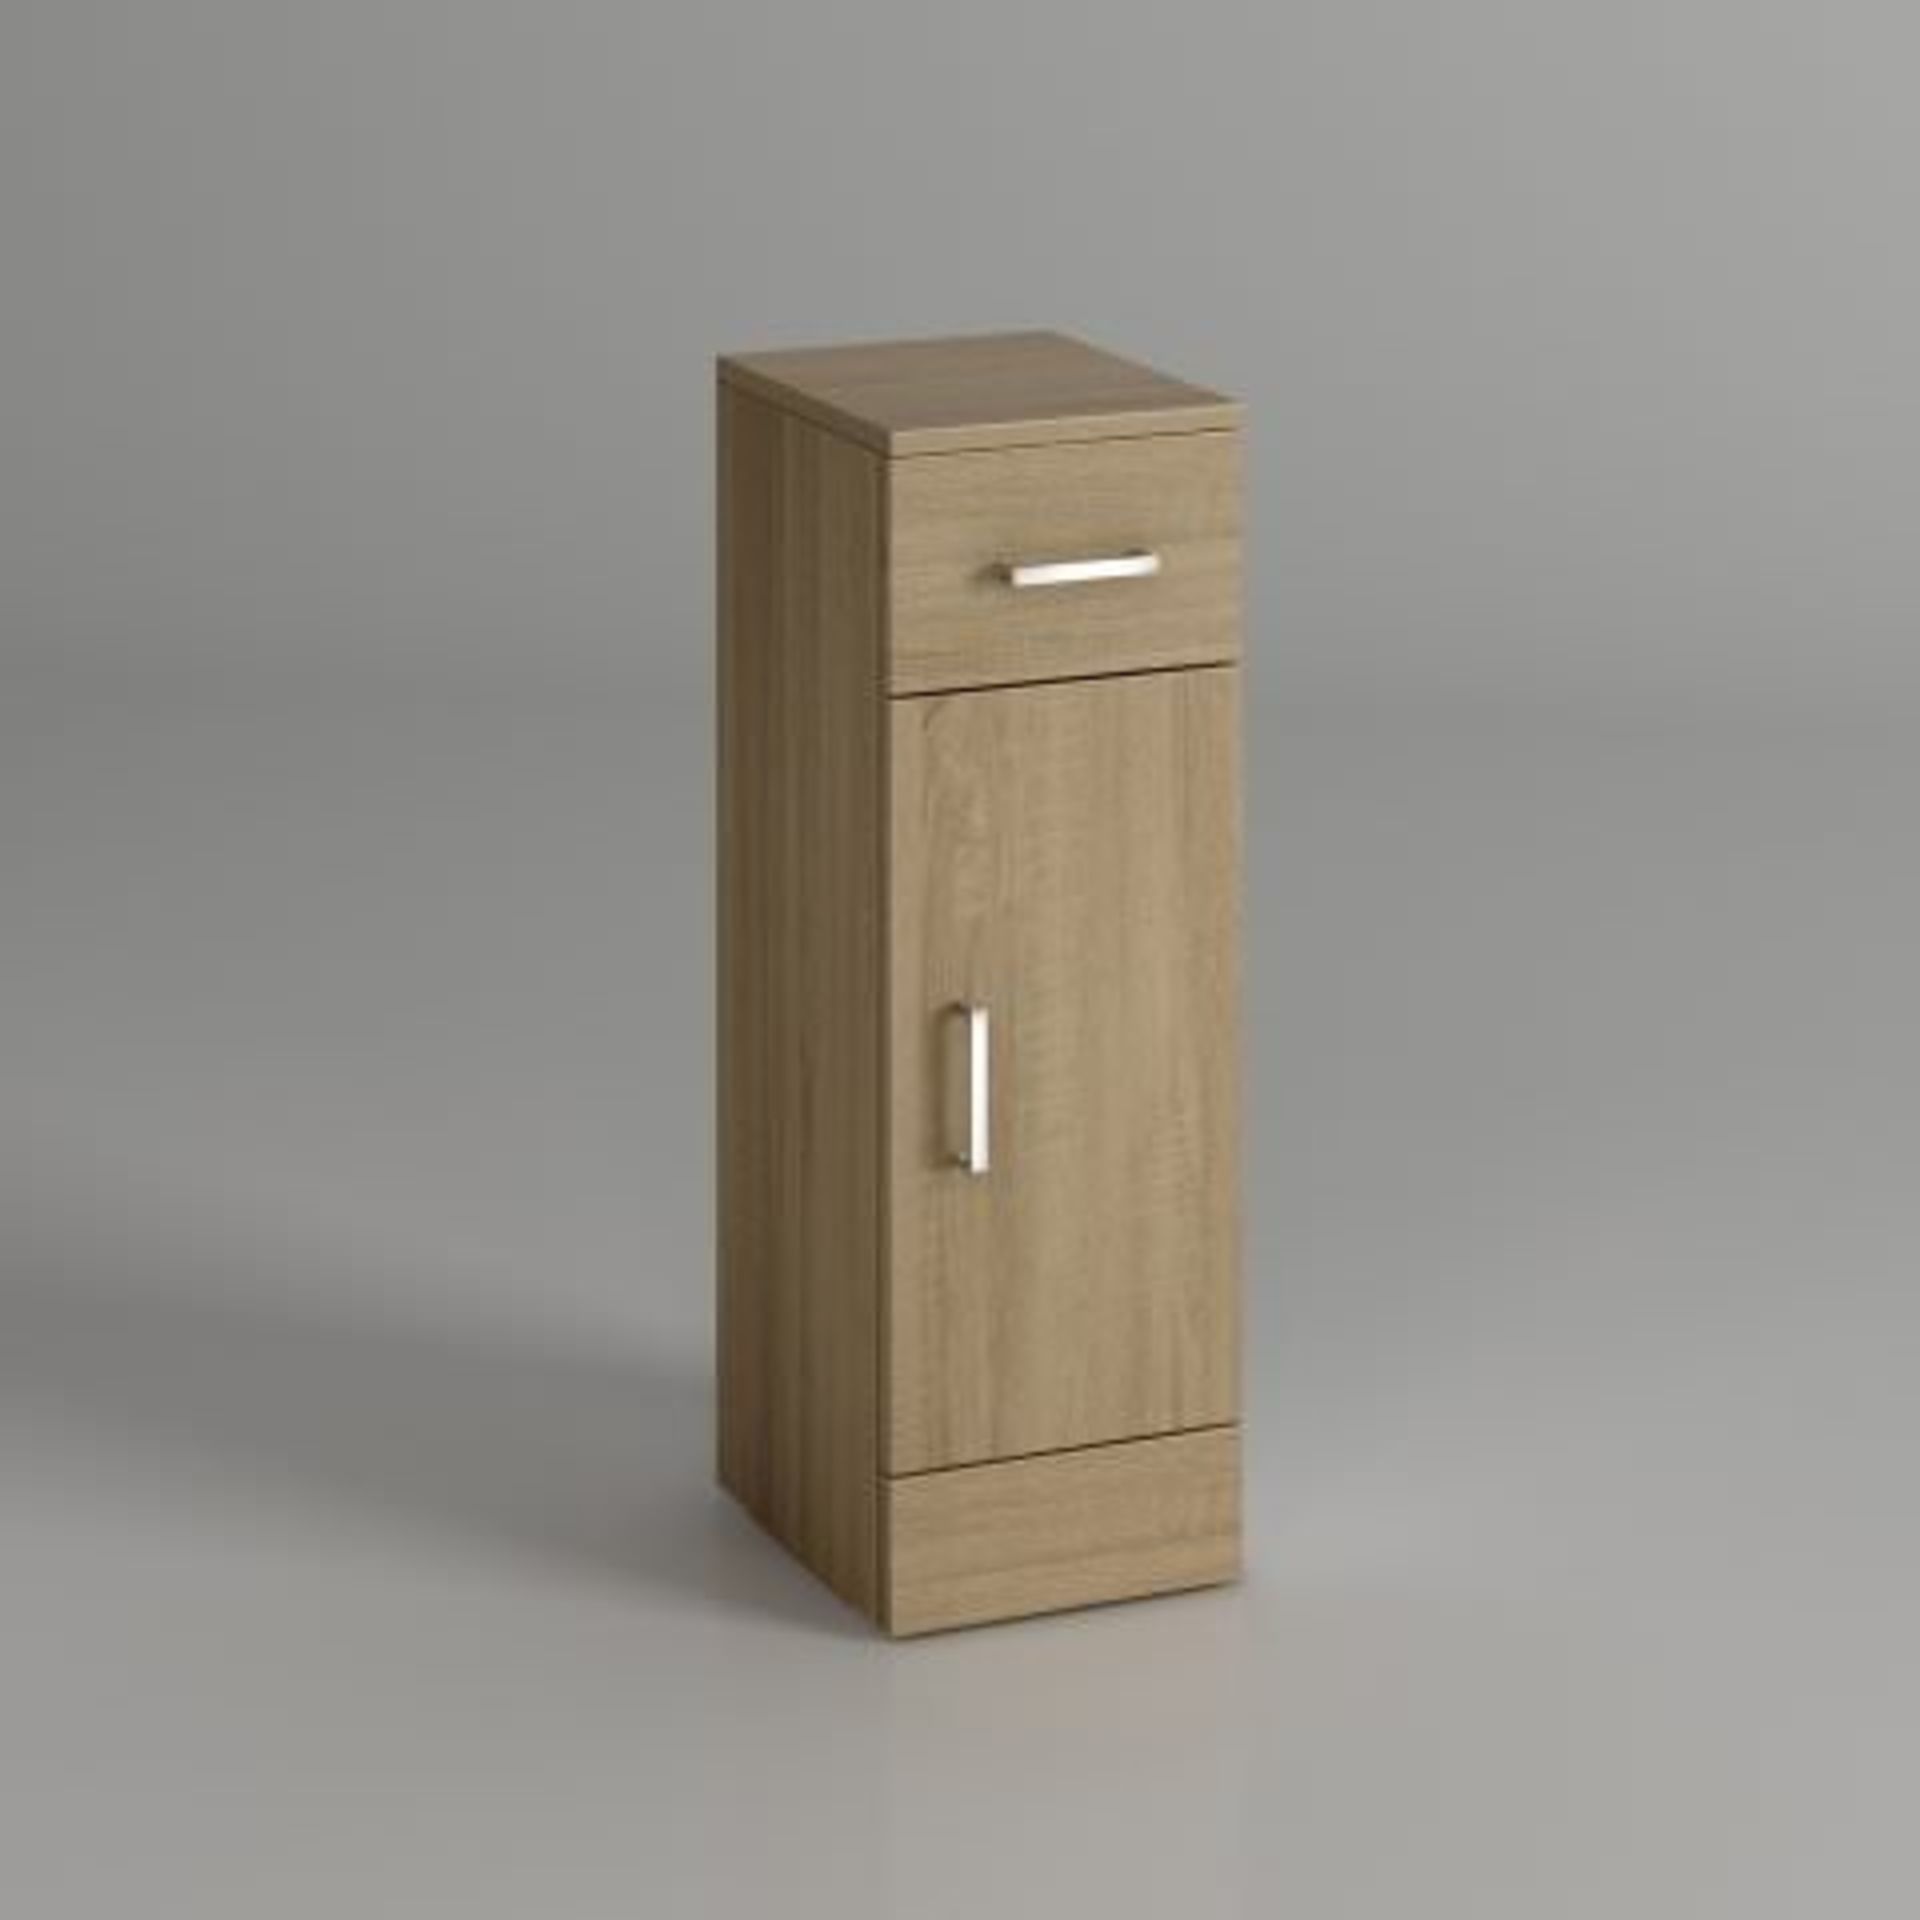 (35) 250x300mm Quartz Oak Effect Small Side Cabinet Unit. RRP £162.99. This state-of-the-art oak - Image 3 of 3